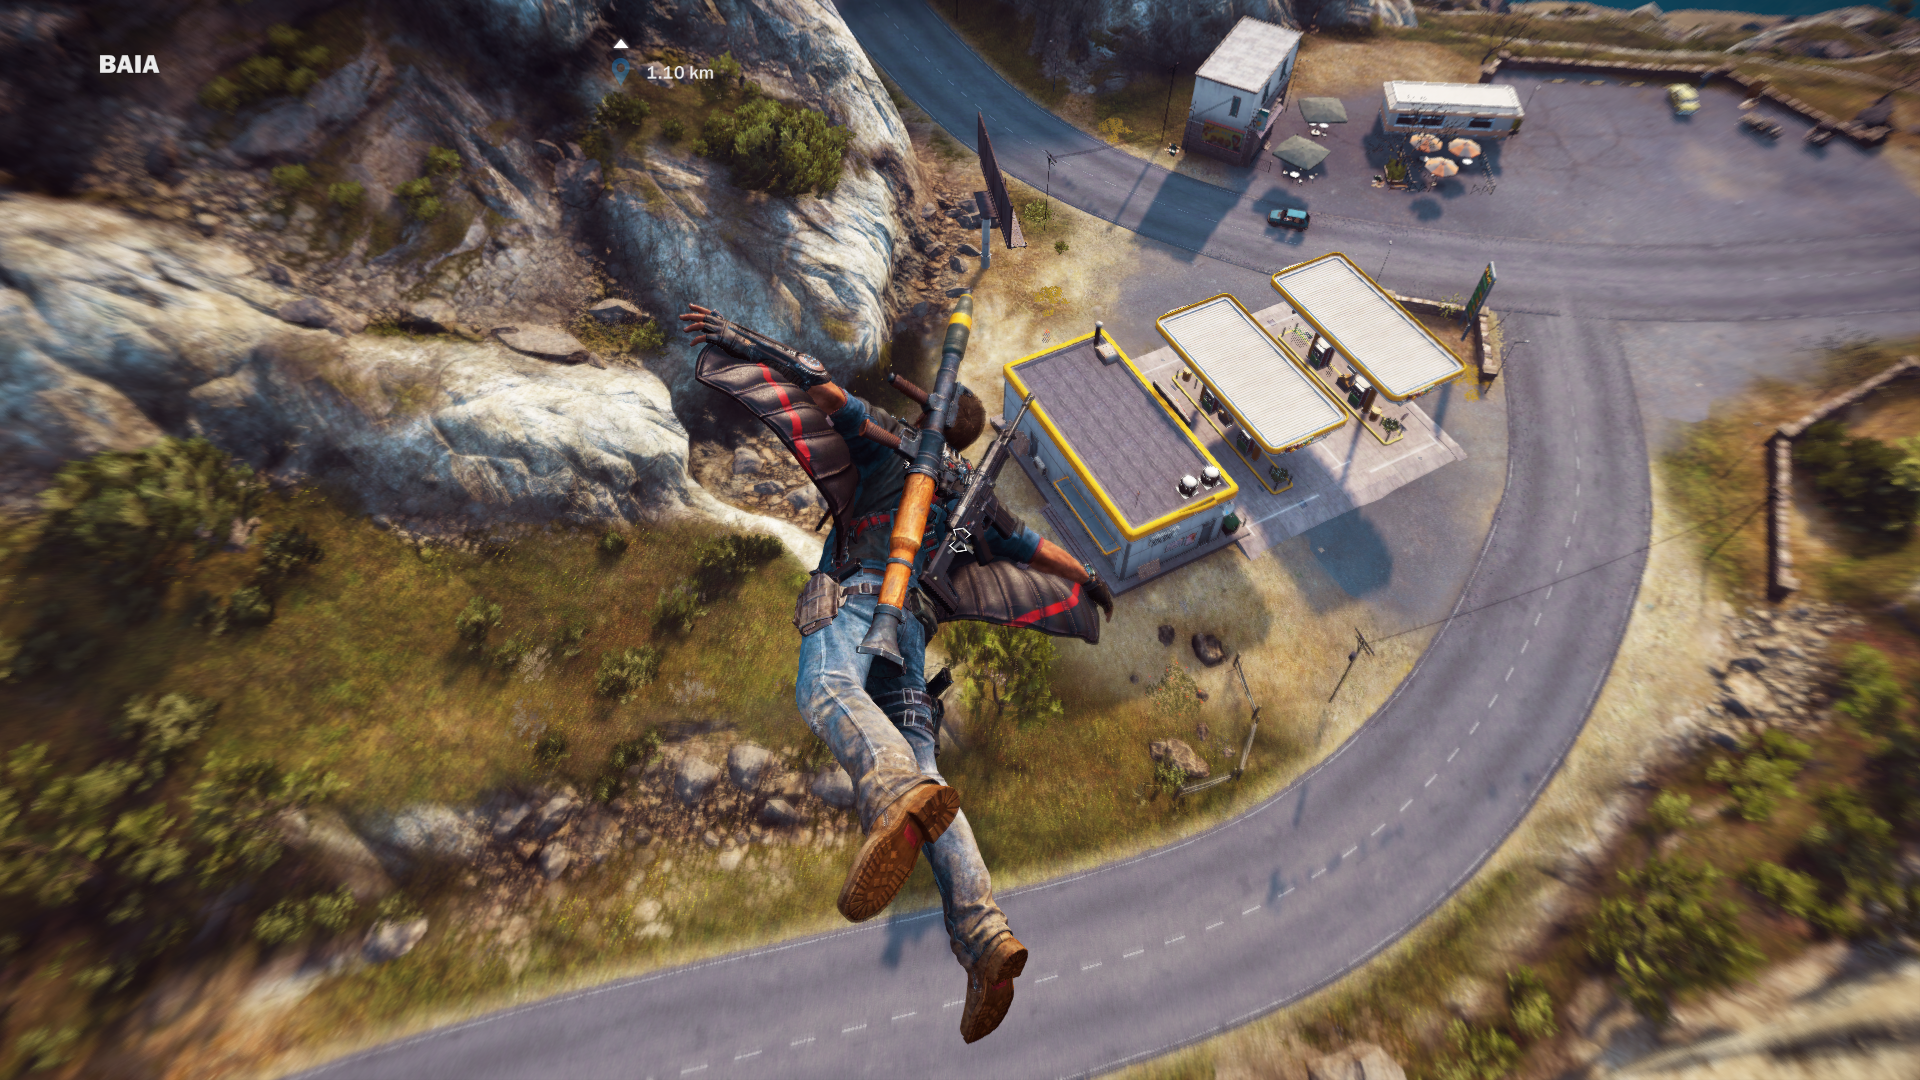 justcause3_201512032008jj6.png